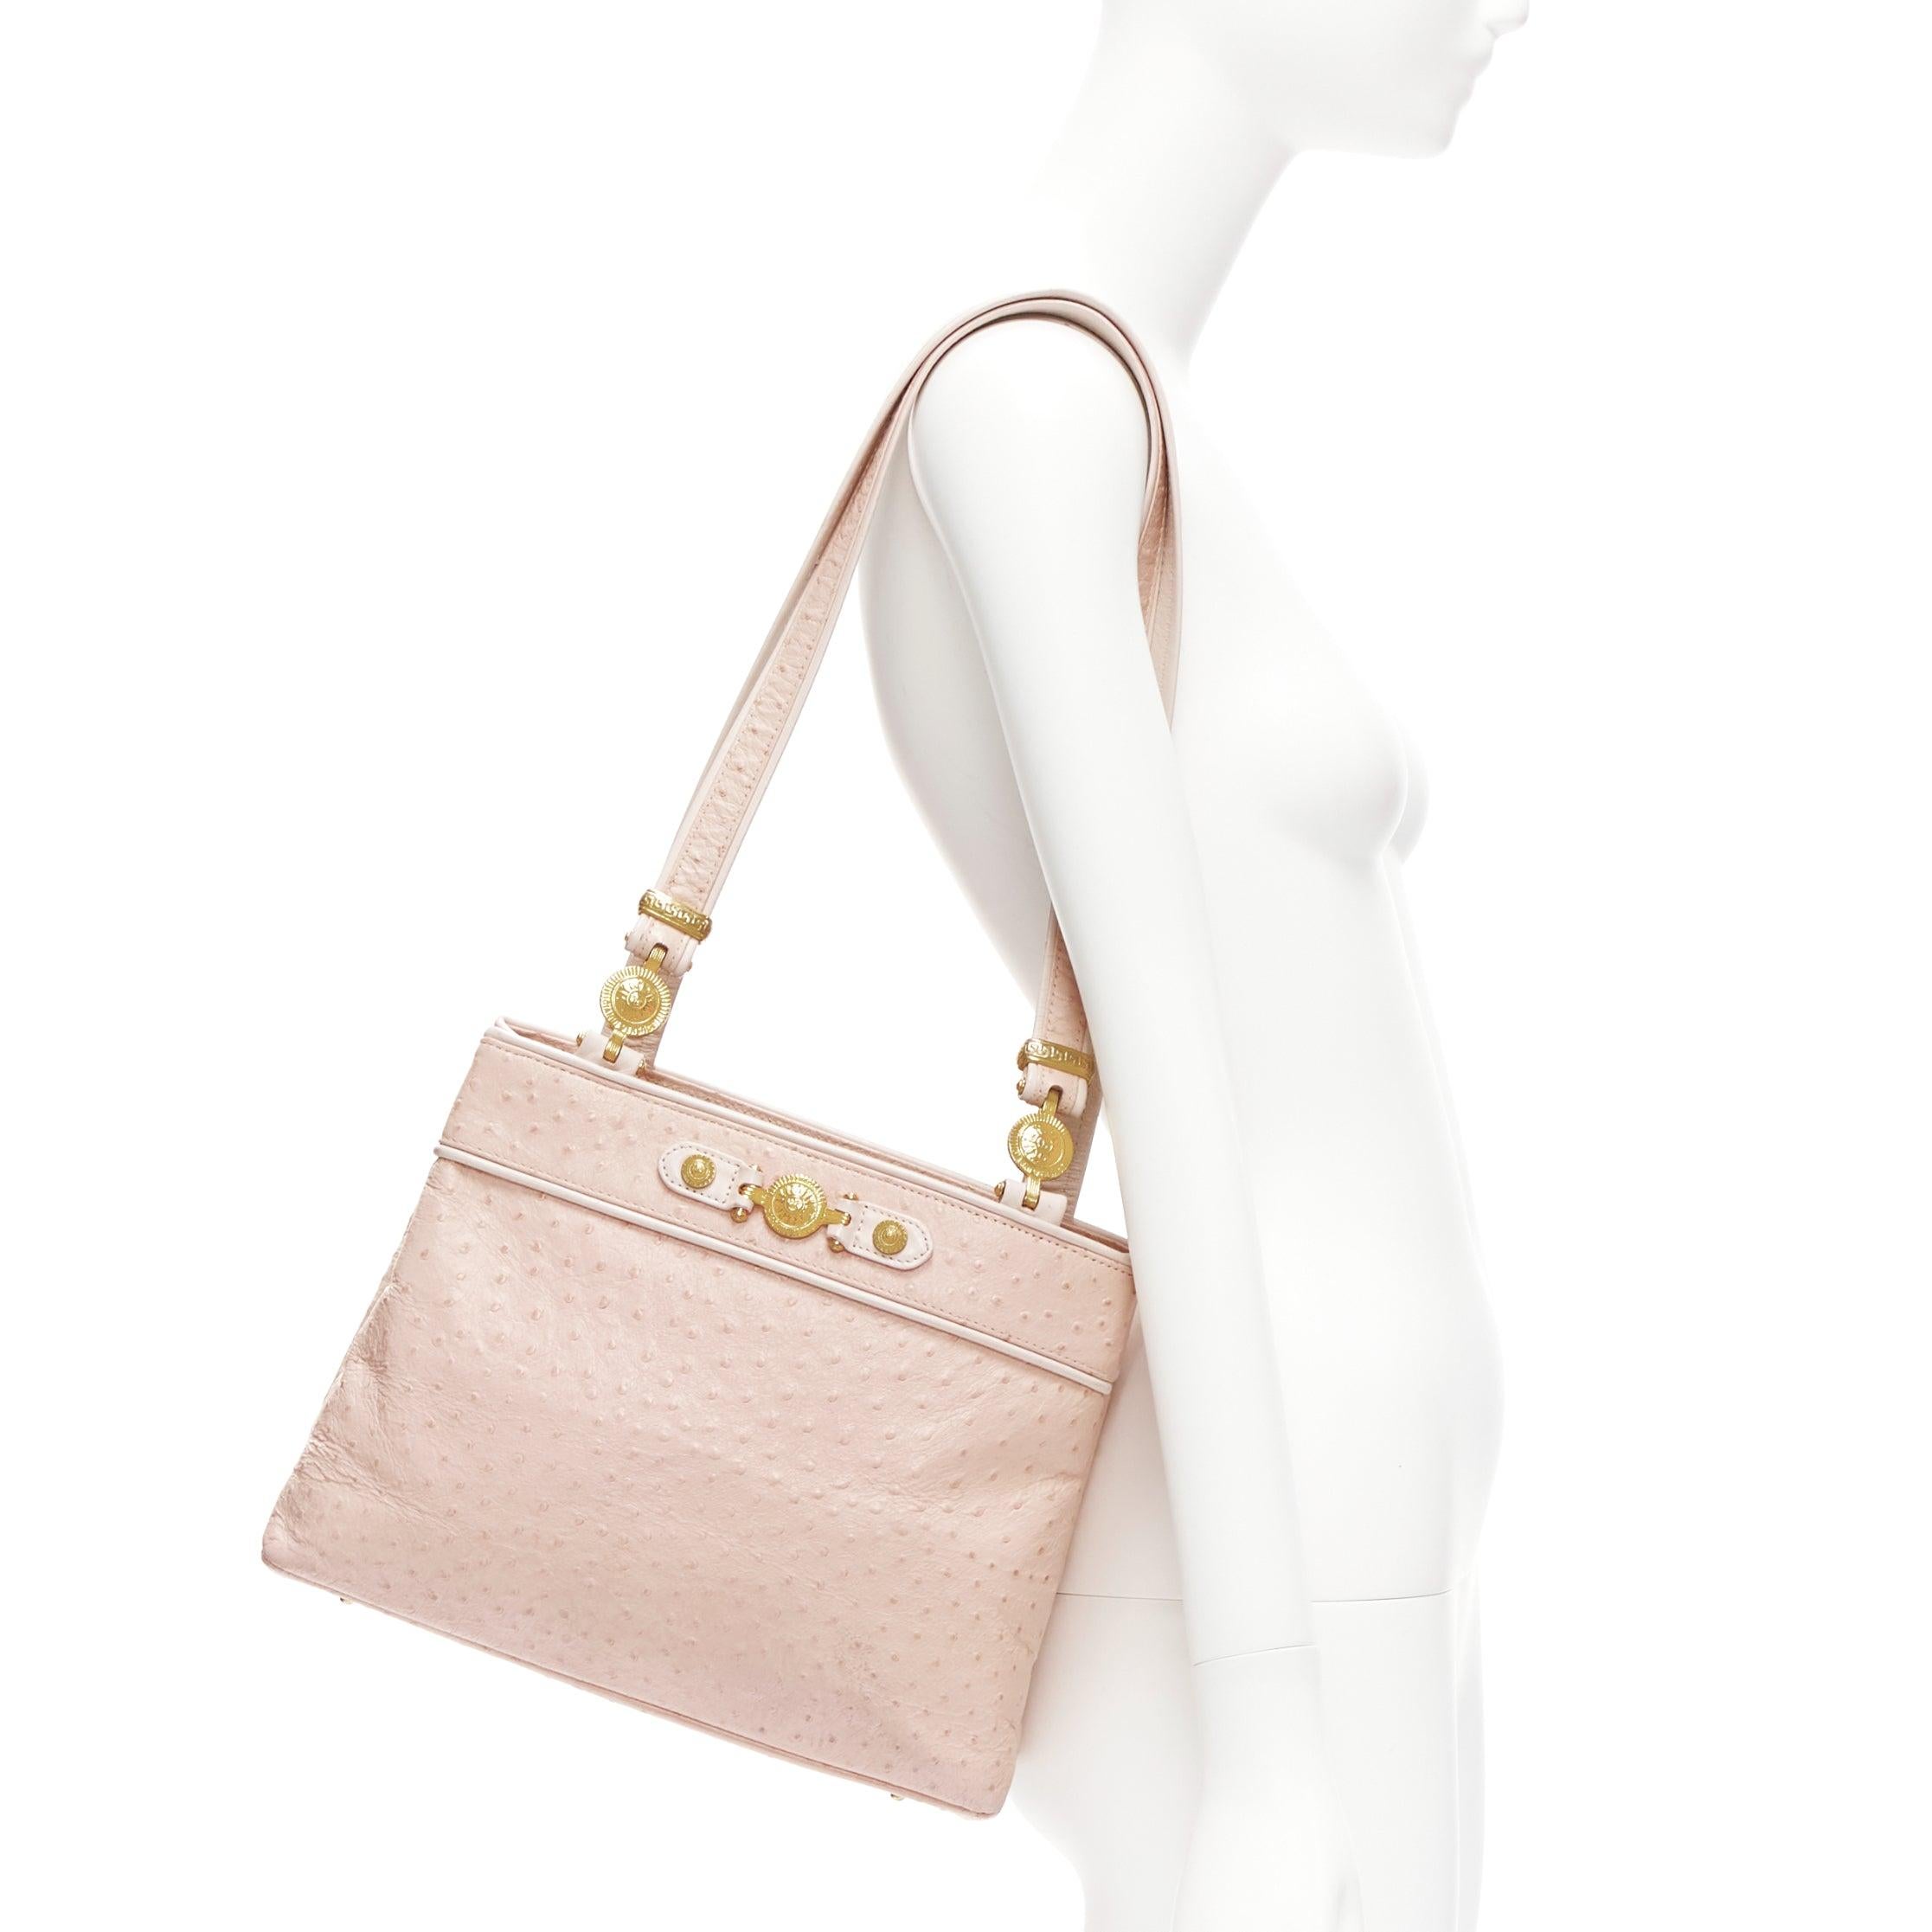 GIANNI VERSACE Vintage pink leather gold Medusa long strap tote bag
Reference: KNCN/A00049
Brand: Gianni Versace
Collection: Tribute
Material: Leather
Color: Pink, Gold
Pattern: Animal Print
Closure: Zip
Lining: Black Fabric
Extra Details: Medusa